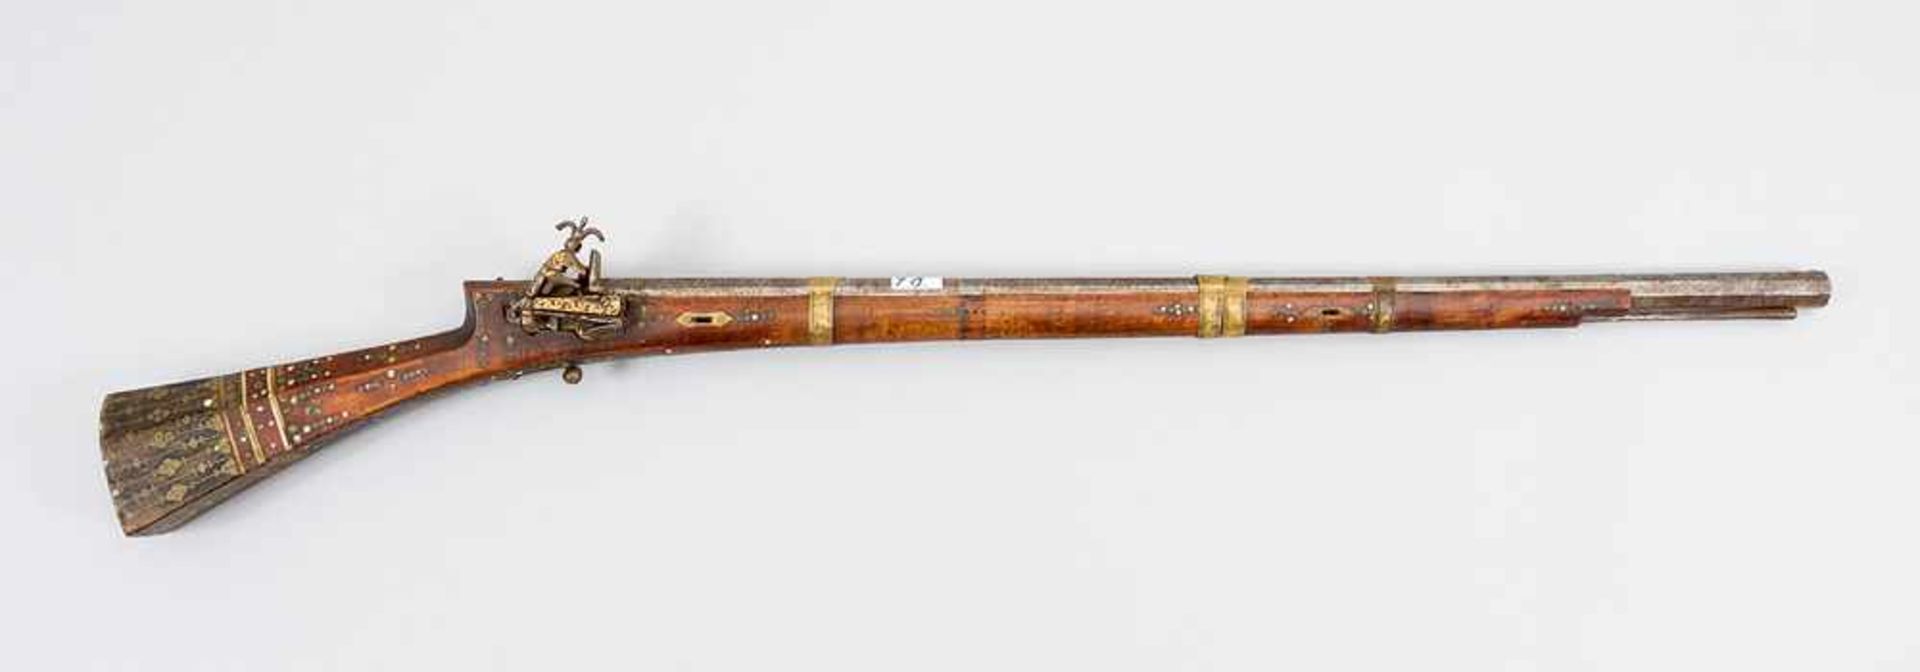 A Ottoman Riffle, wooden shaft with ornamental decorations in bronze, horn and wood. Iron filler and